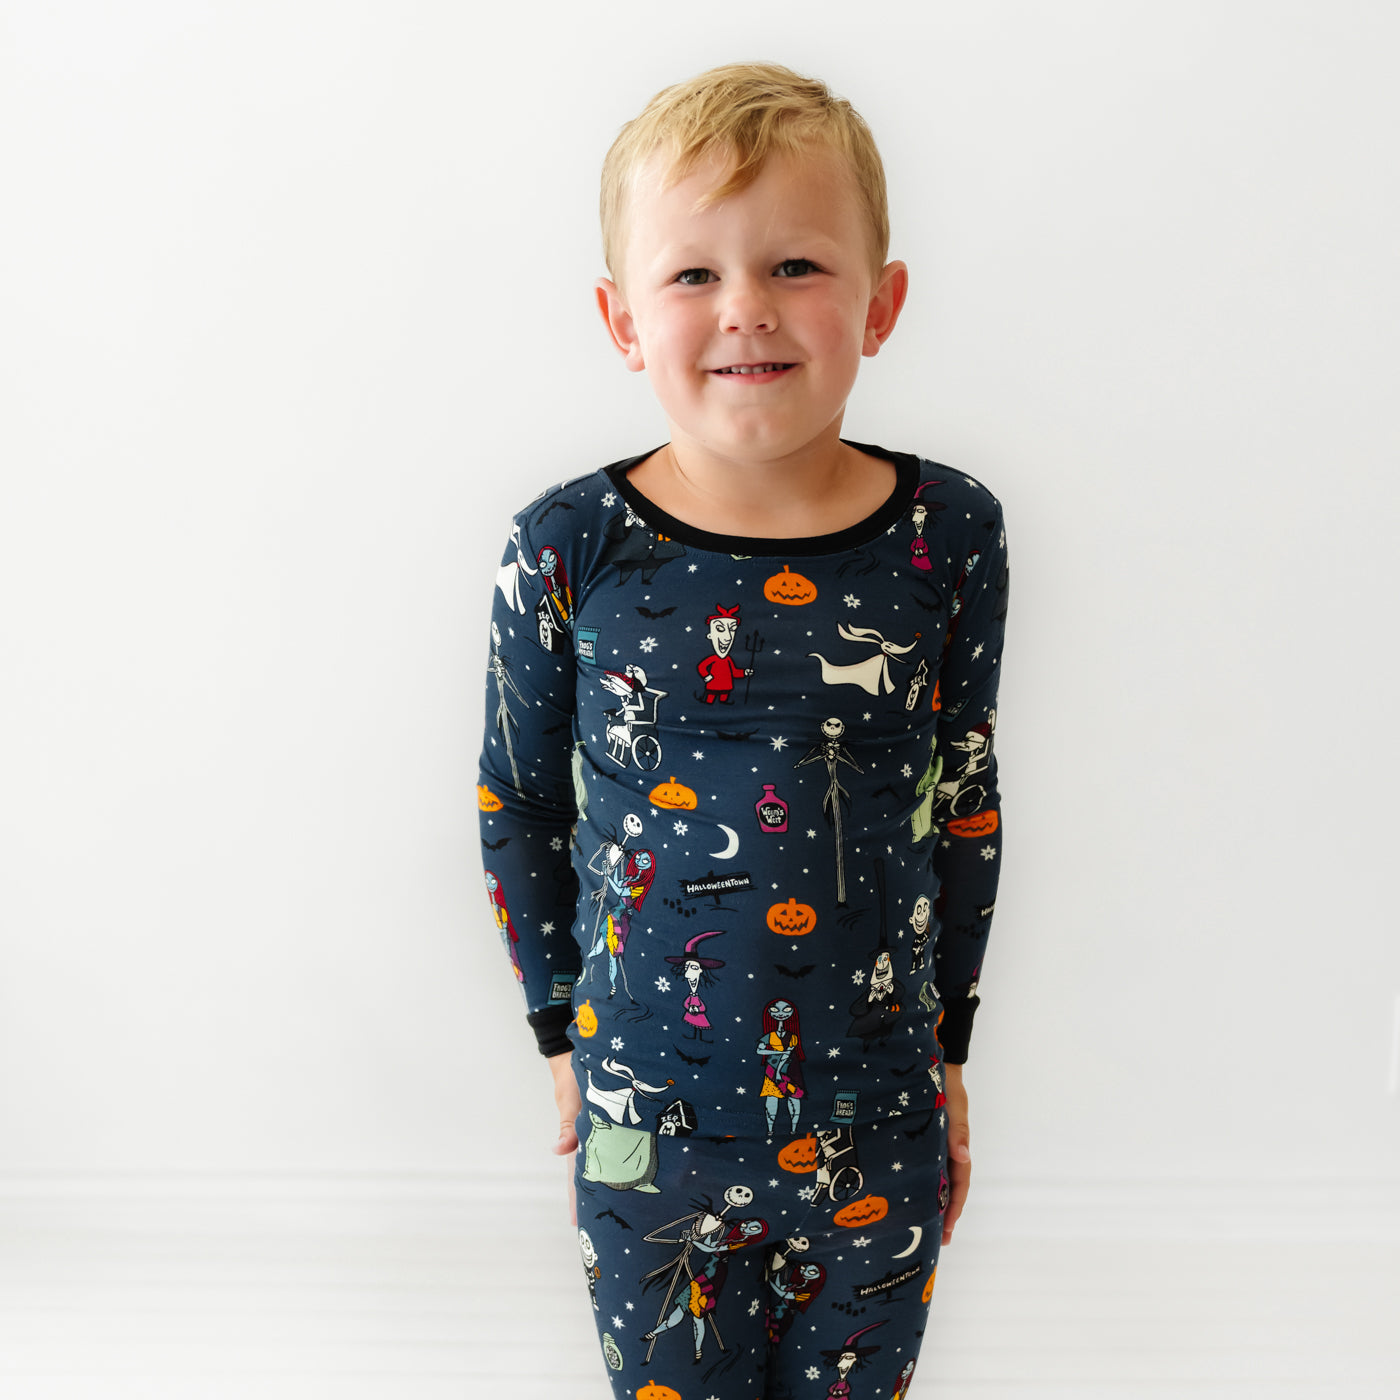 Child wearing a Jack Skellington and Friends printed two-piece pajama set